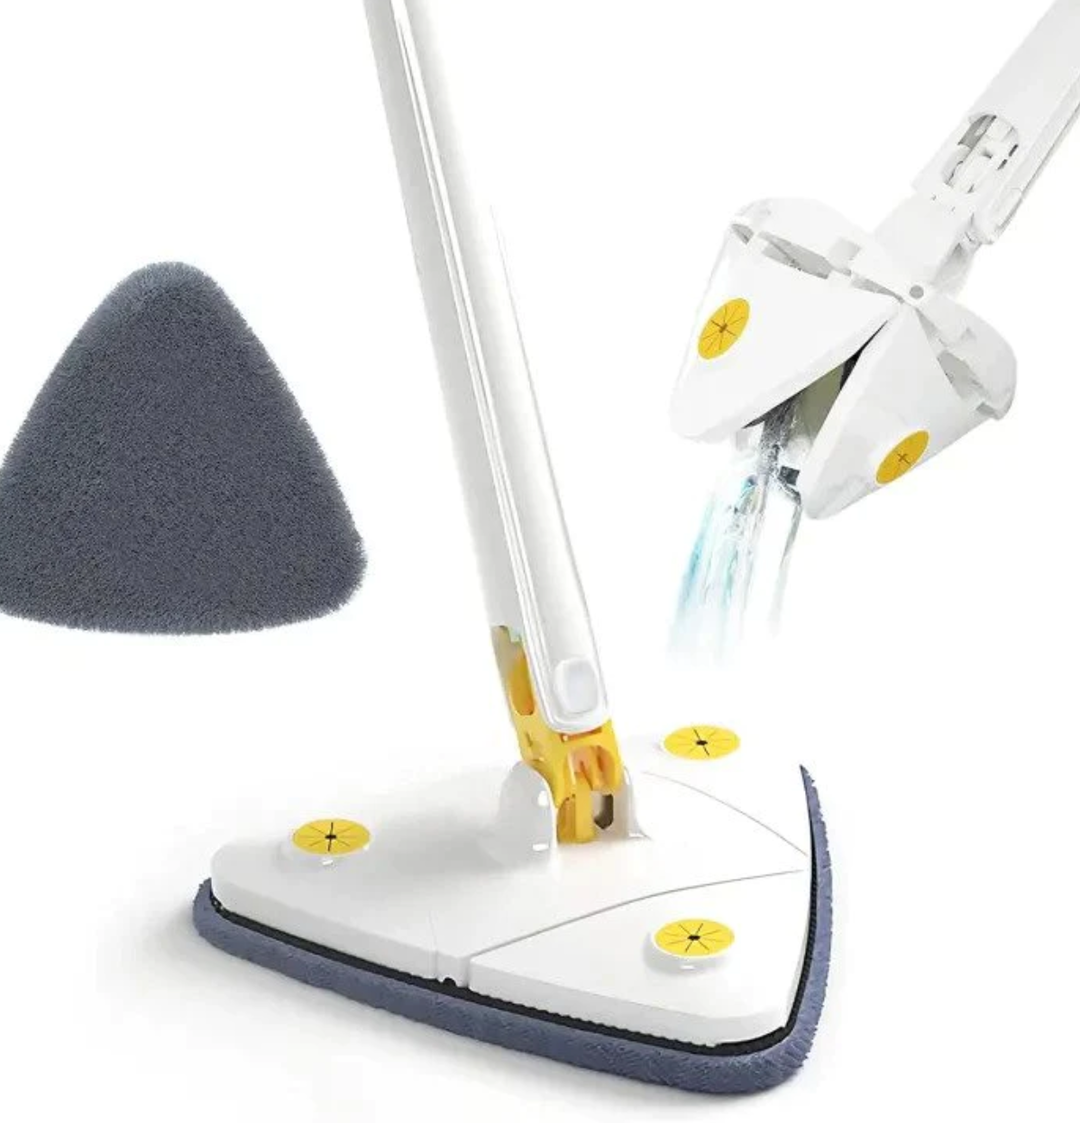 360 rotatable adjustable cleaning mop, 360 rotatable mop, rotatable adjustable cleaning mop, rotatable adjusting cleaning mop, 360 degree rotatable cleaning mop